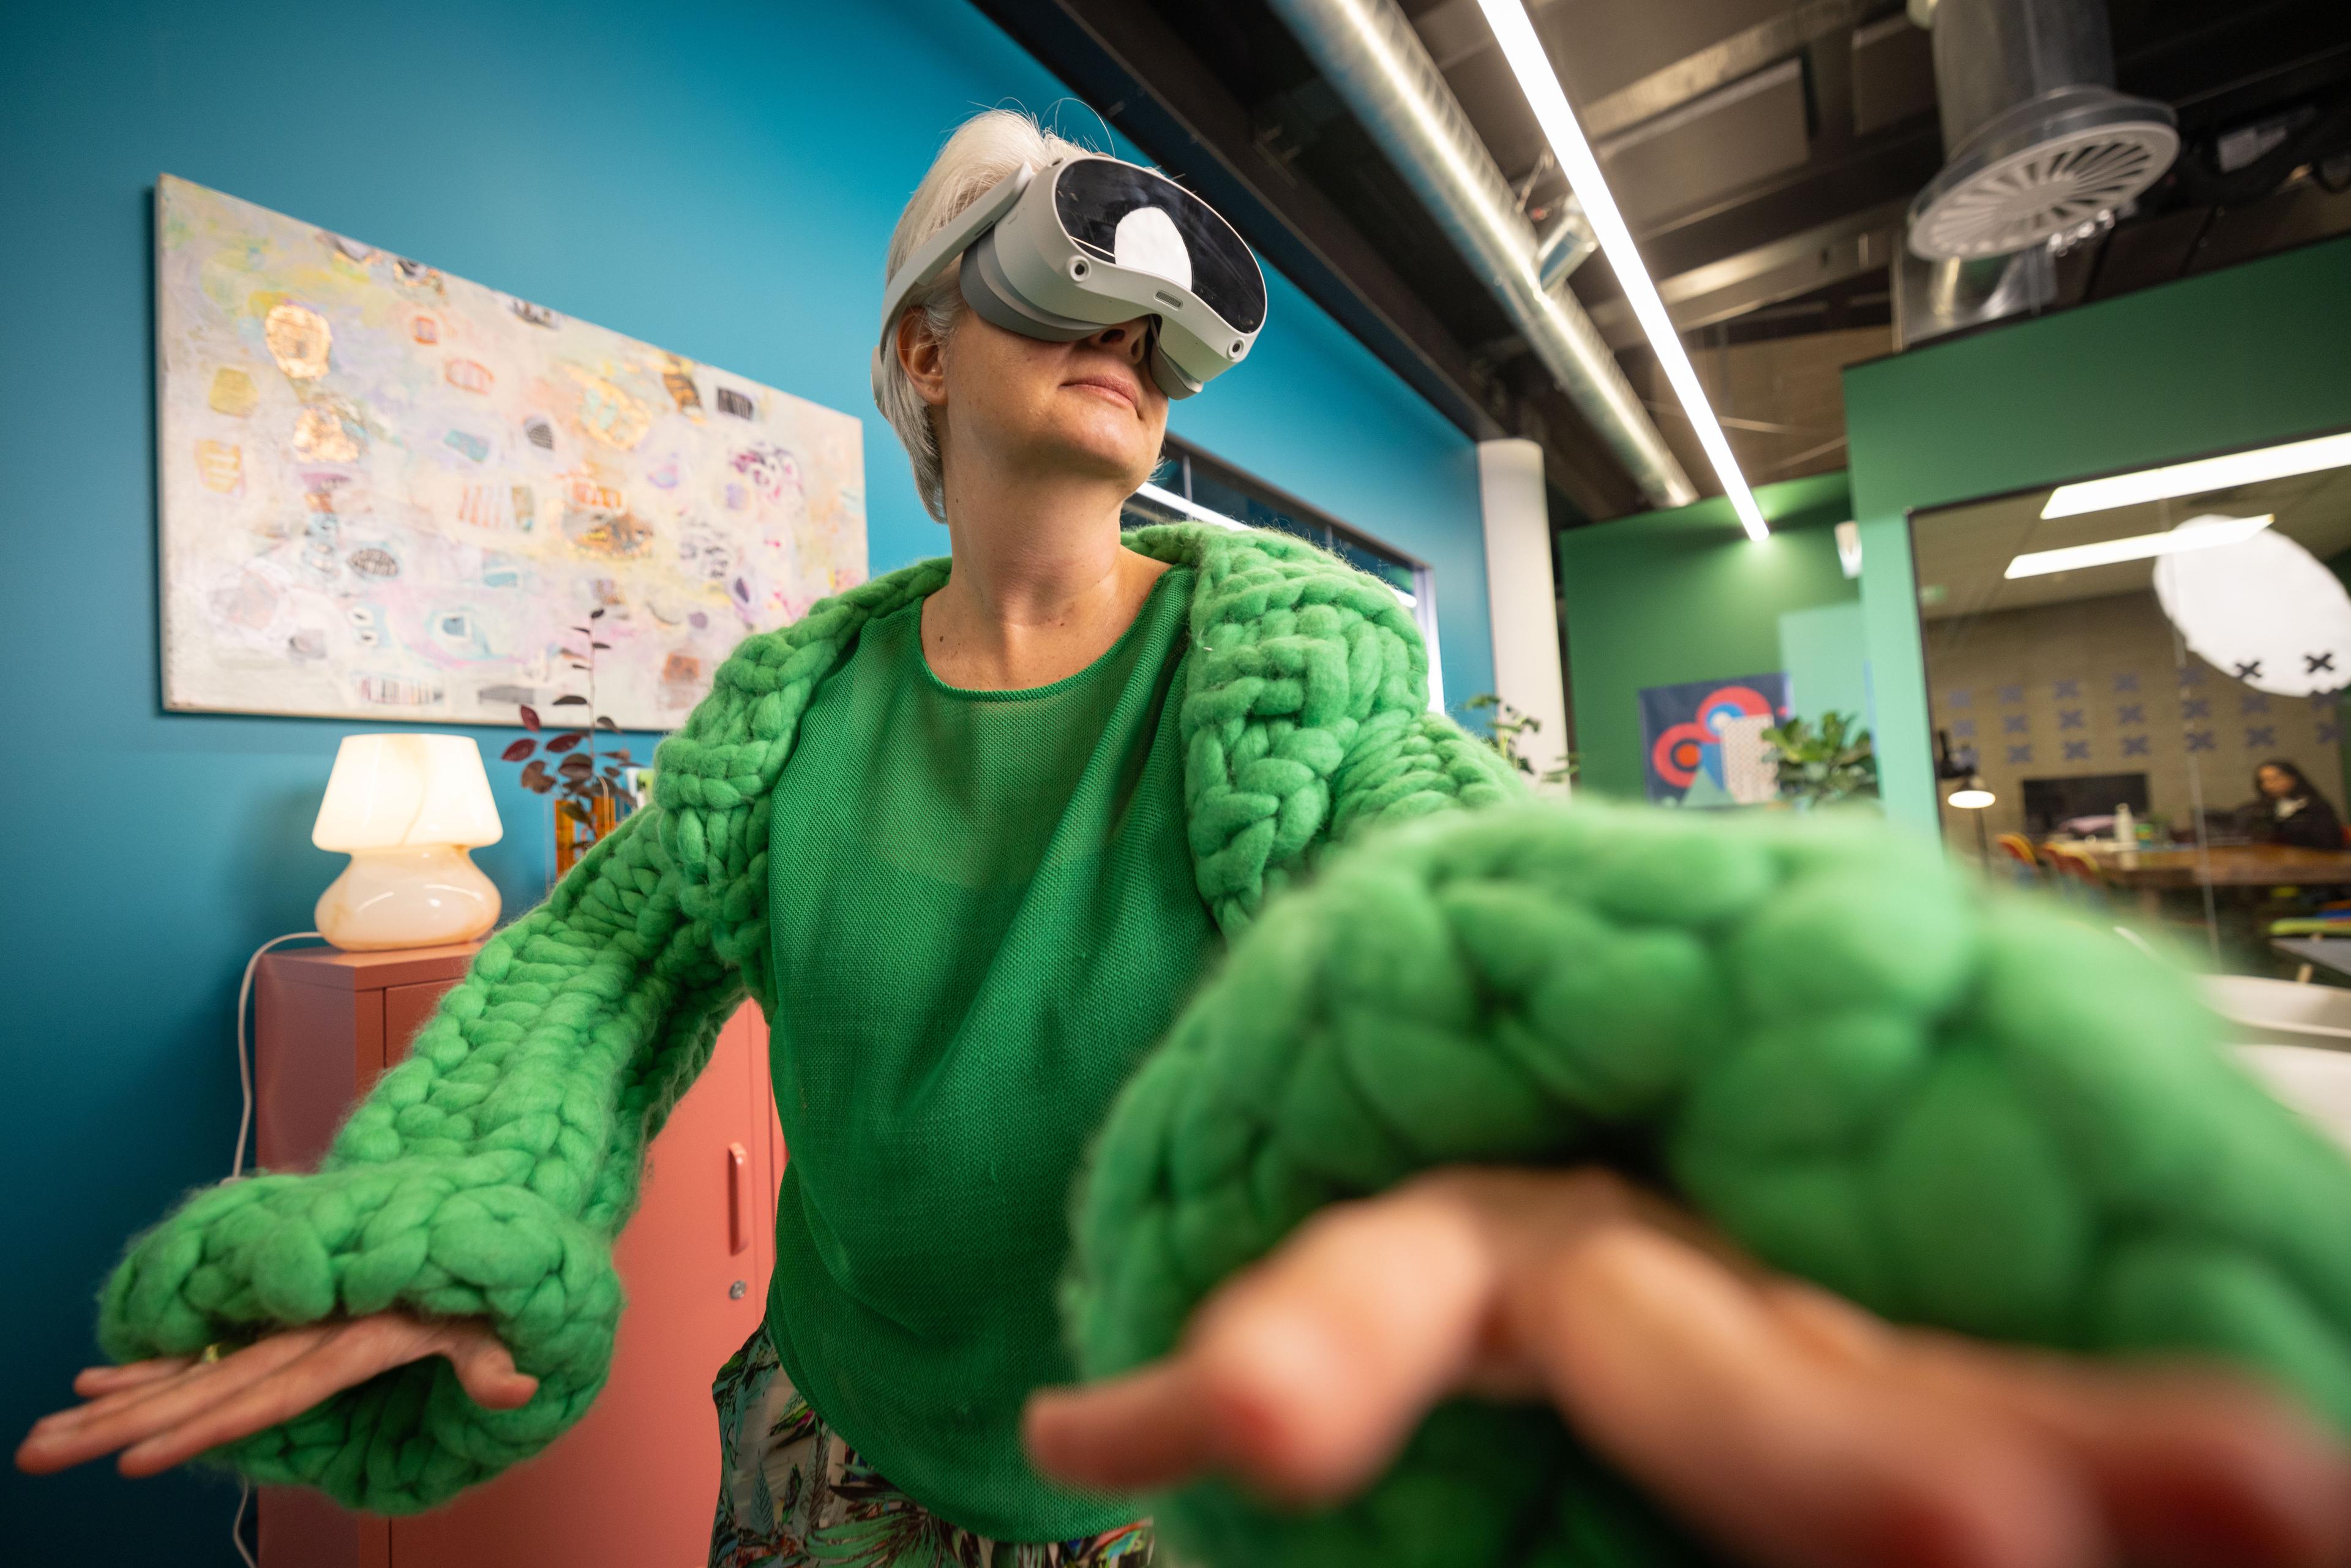 A person wearing a virtual reality headset and a bright green knit sweater extends their arm as if interacting with a virtual environment.